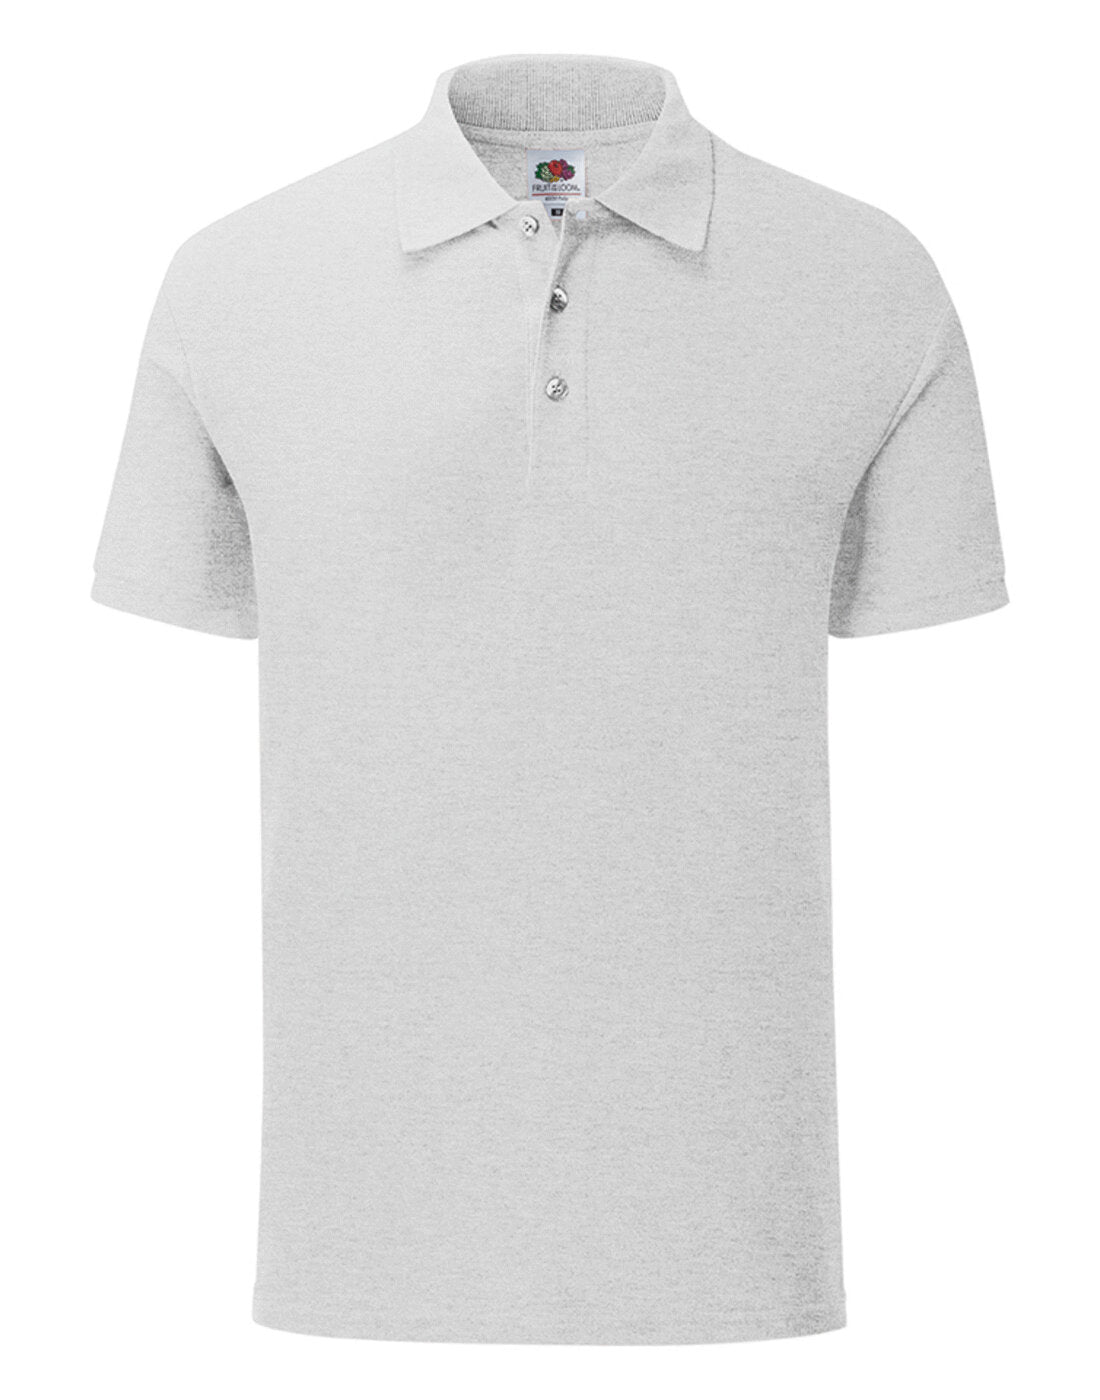 Fruit of the Loom 65/35 Tailored Fit Polo - Heather